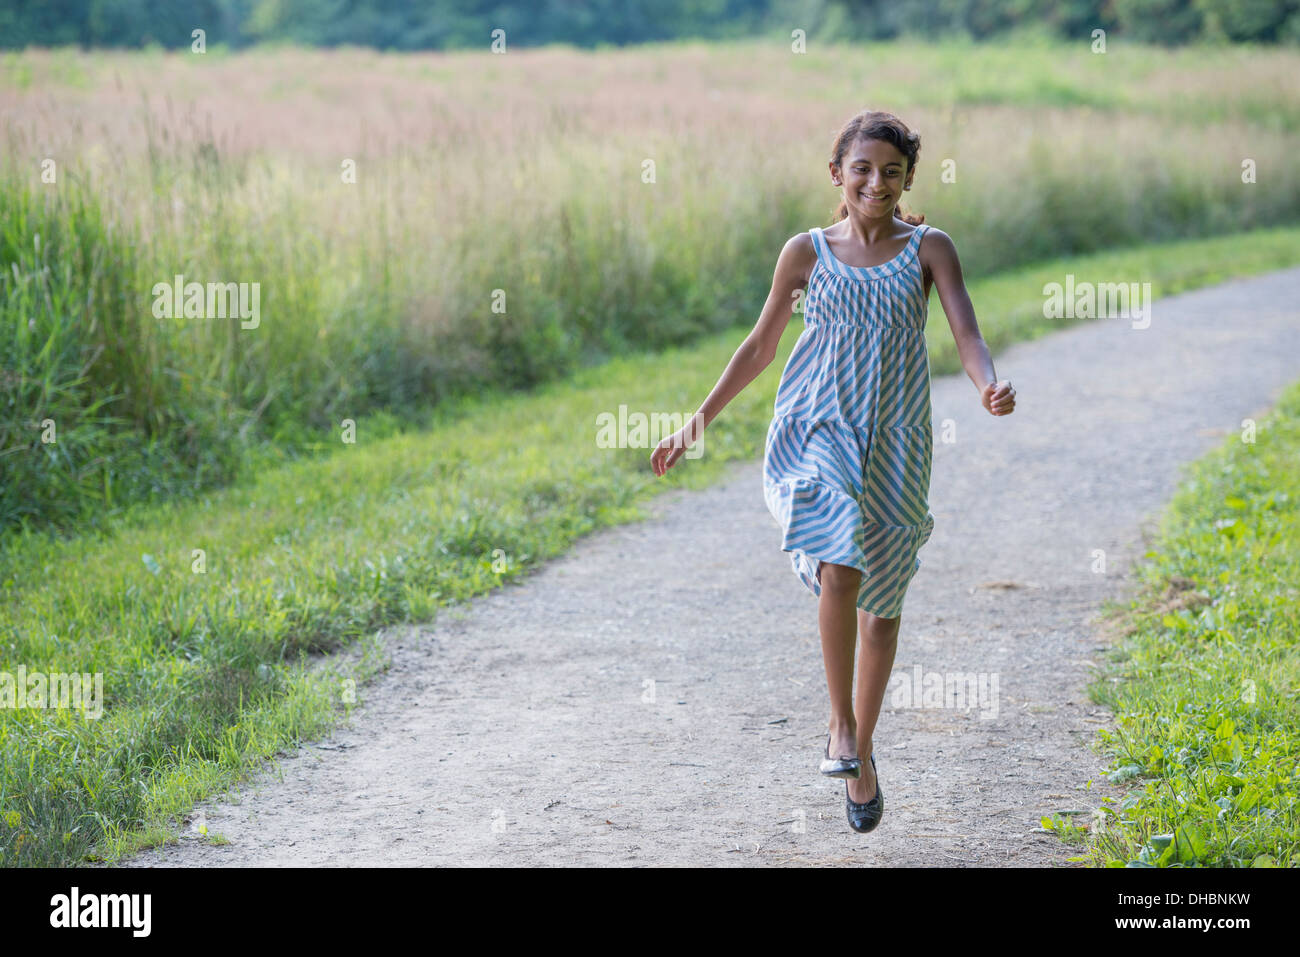 A young girl in a summer dress walking along a path. Stock Photo